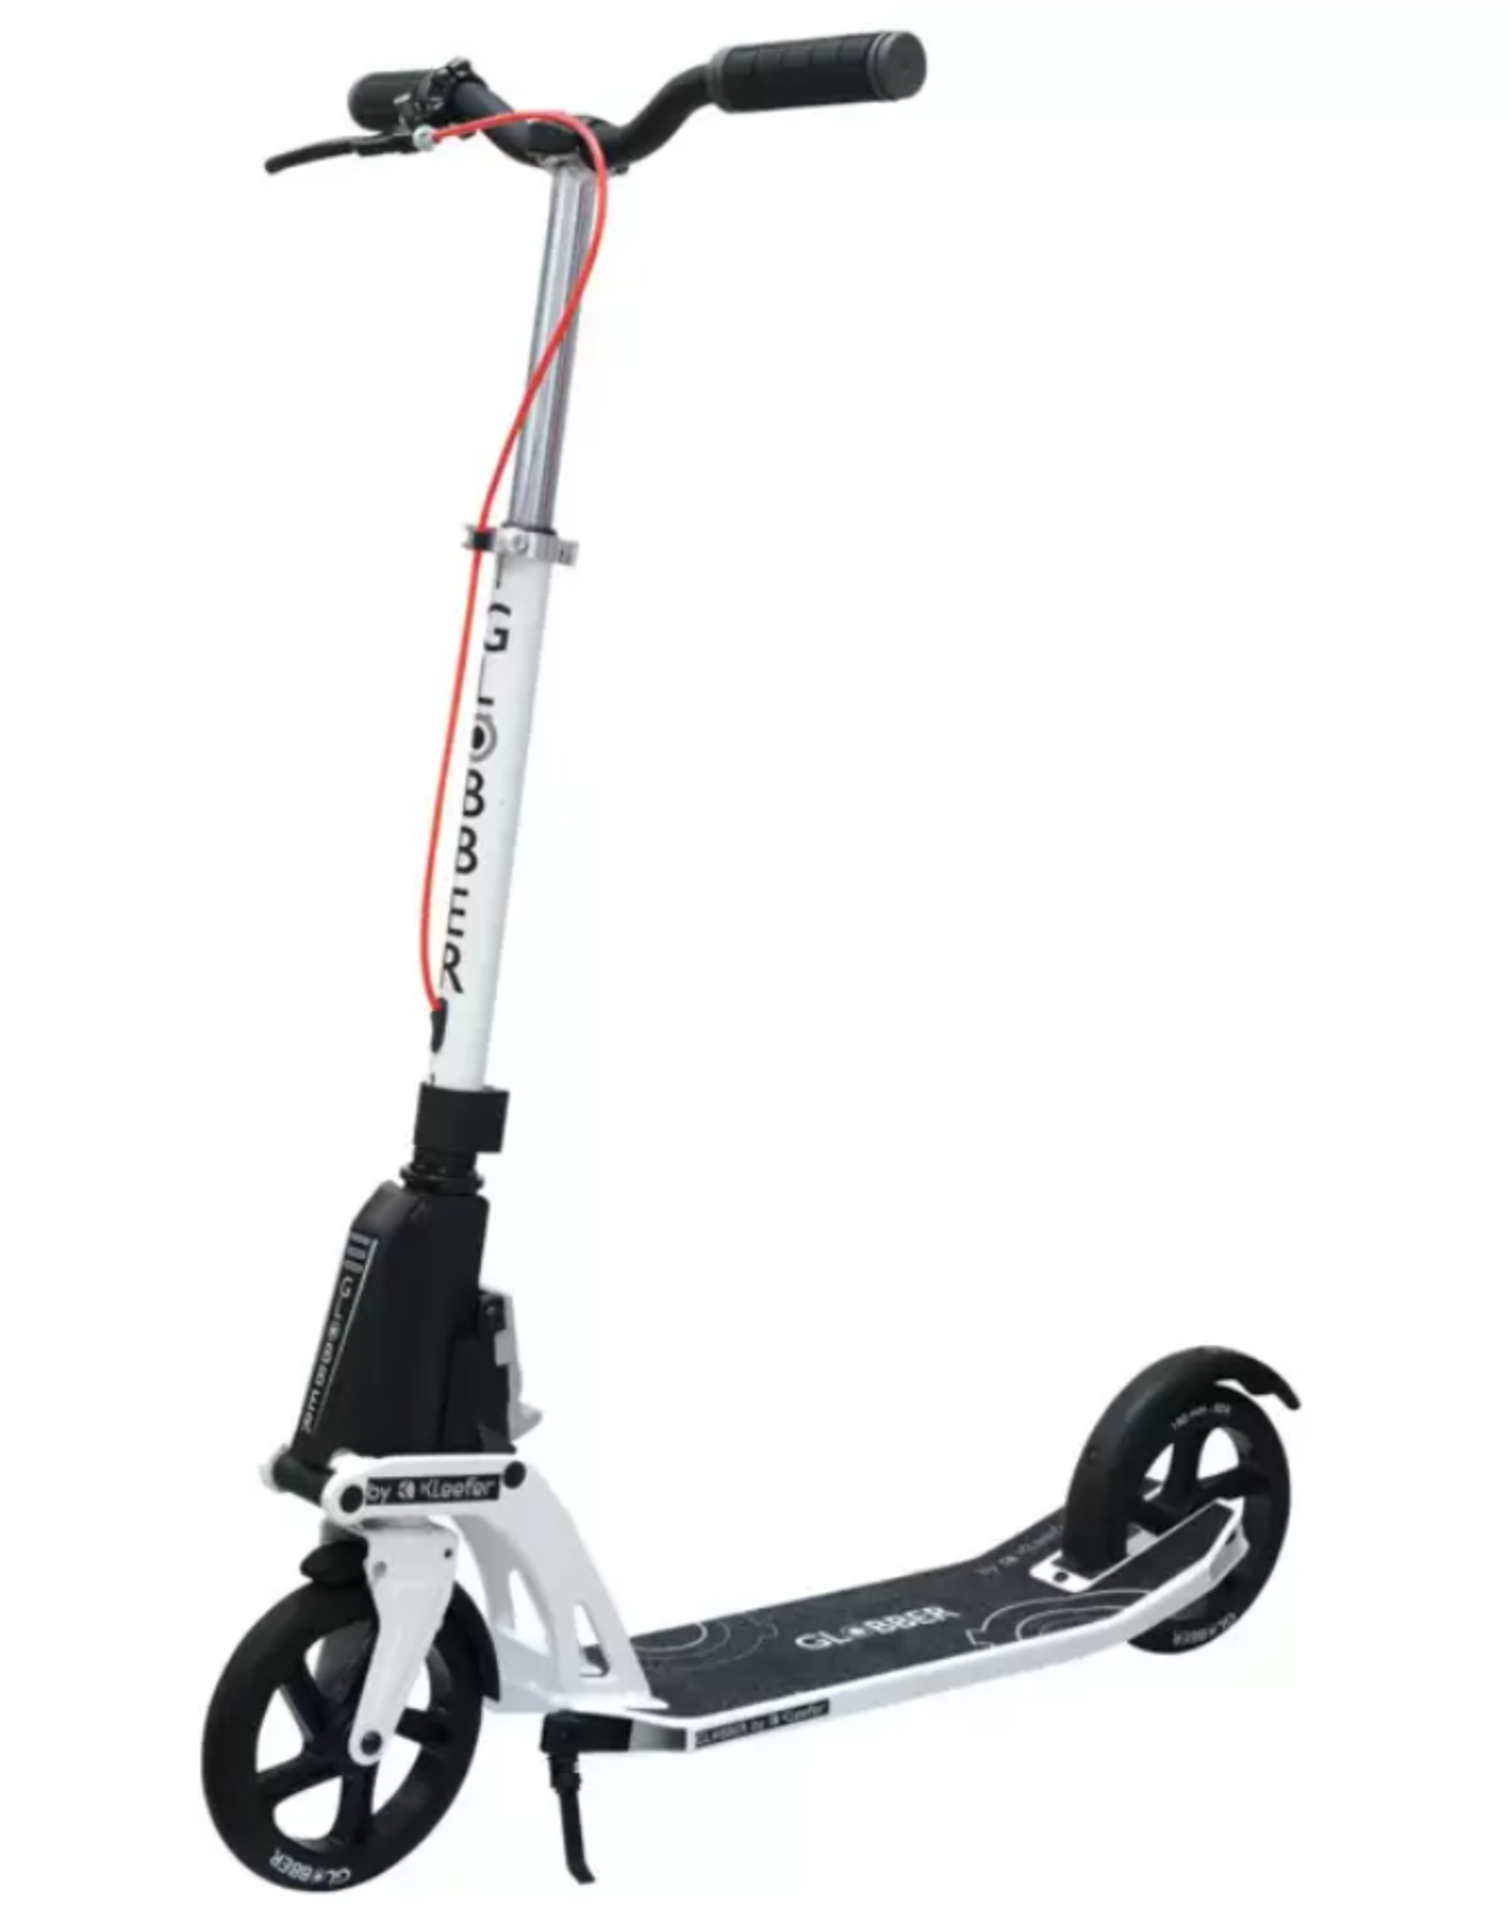 Globber One K Active Adult Scooter with Brakes in White. RRP £169.99. The One K Active Scooter has a